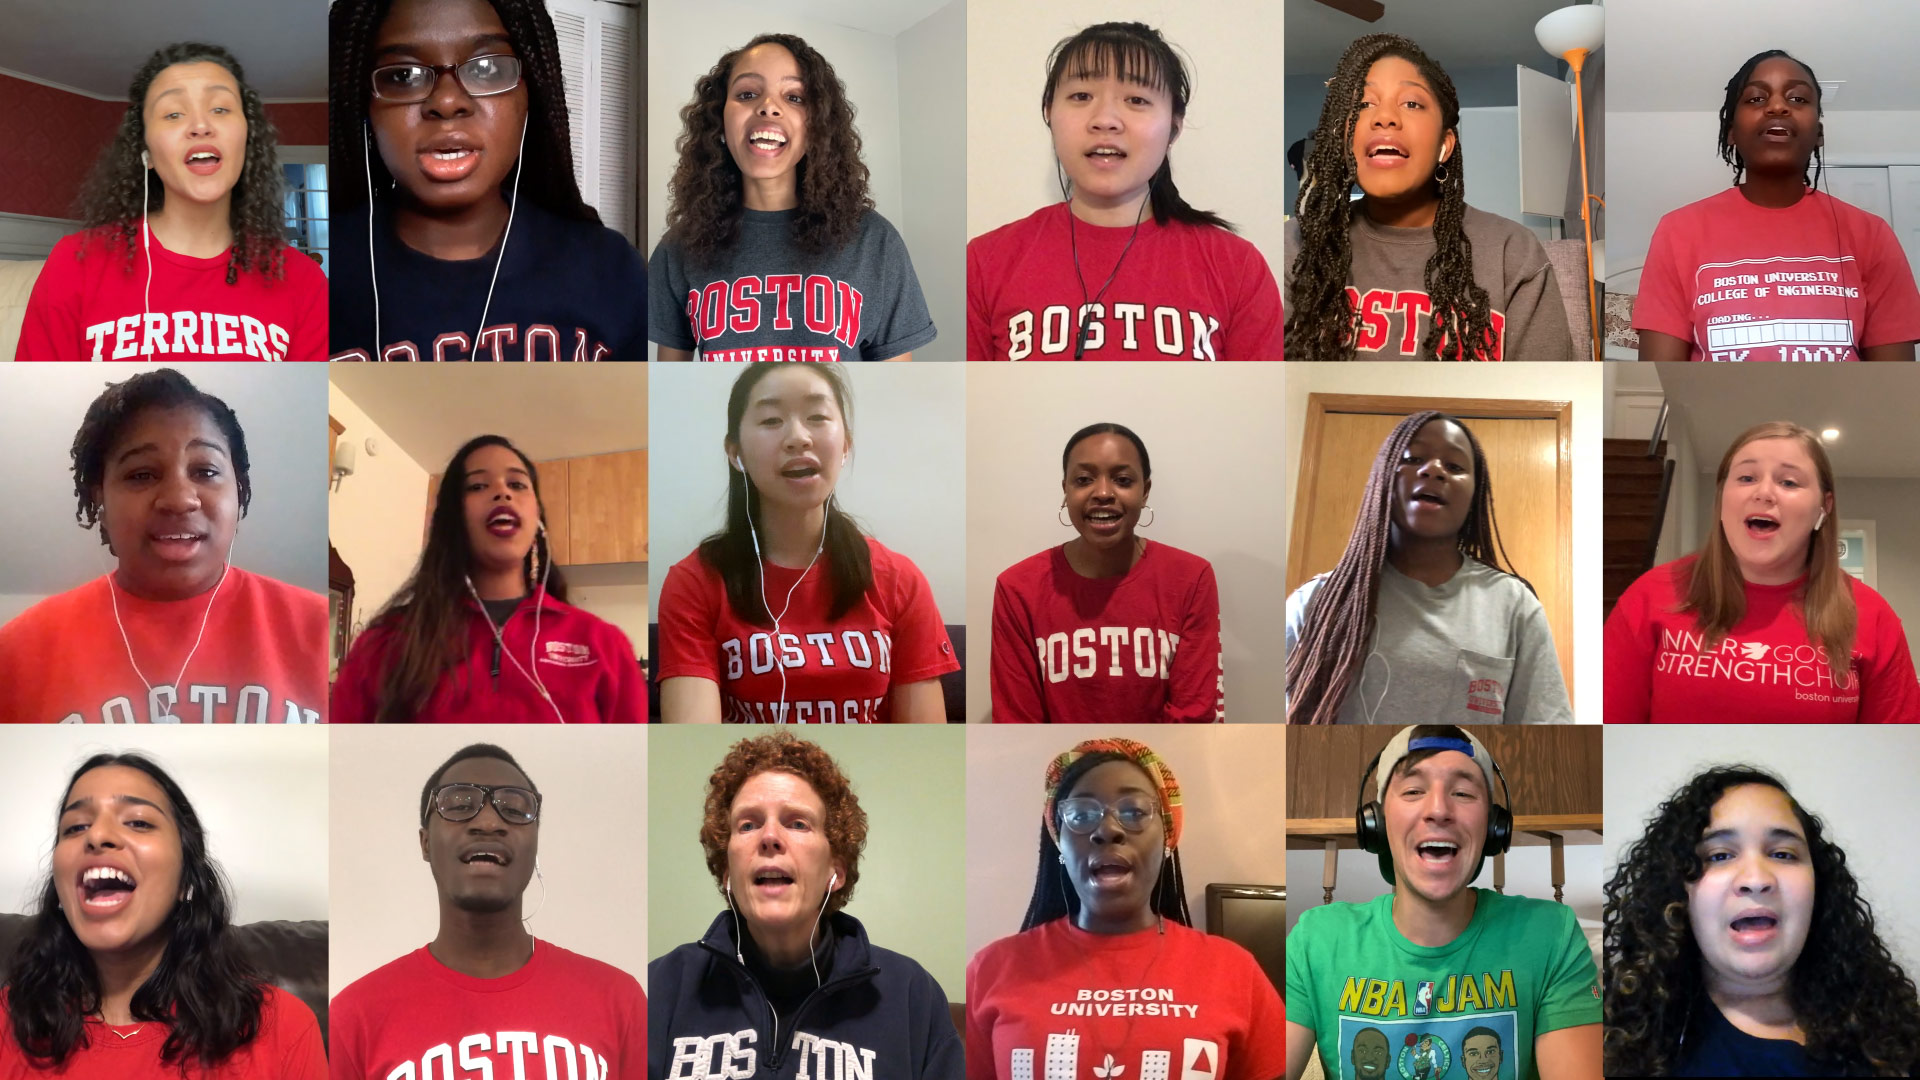 Composite image of members of BU’s Inner Strength Gospel Choir performing their “Unity Medley,” featuring songs by Alma Bazel Androzzo, Carole King, and Bill Withers. Current and former choir members recorded their parts remotely. Most students wear Boston University shirts.